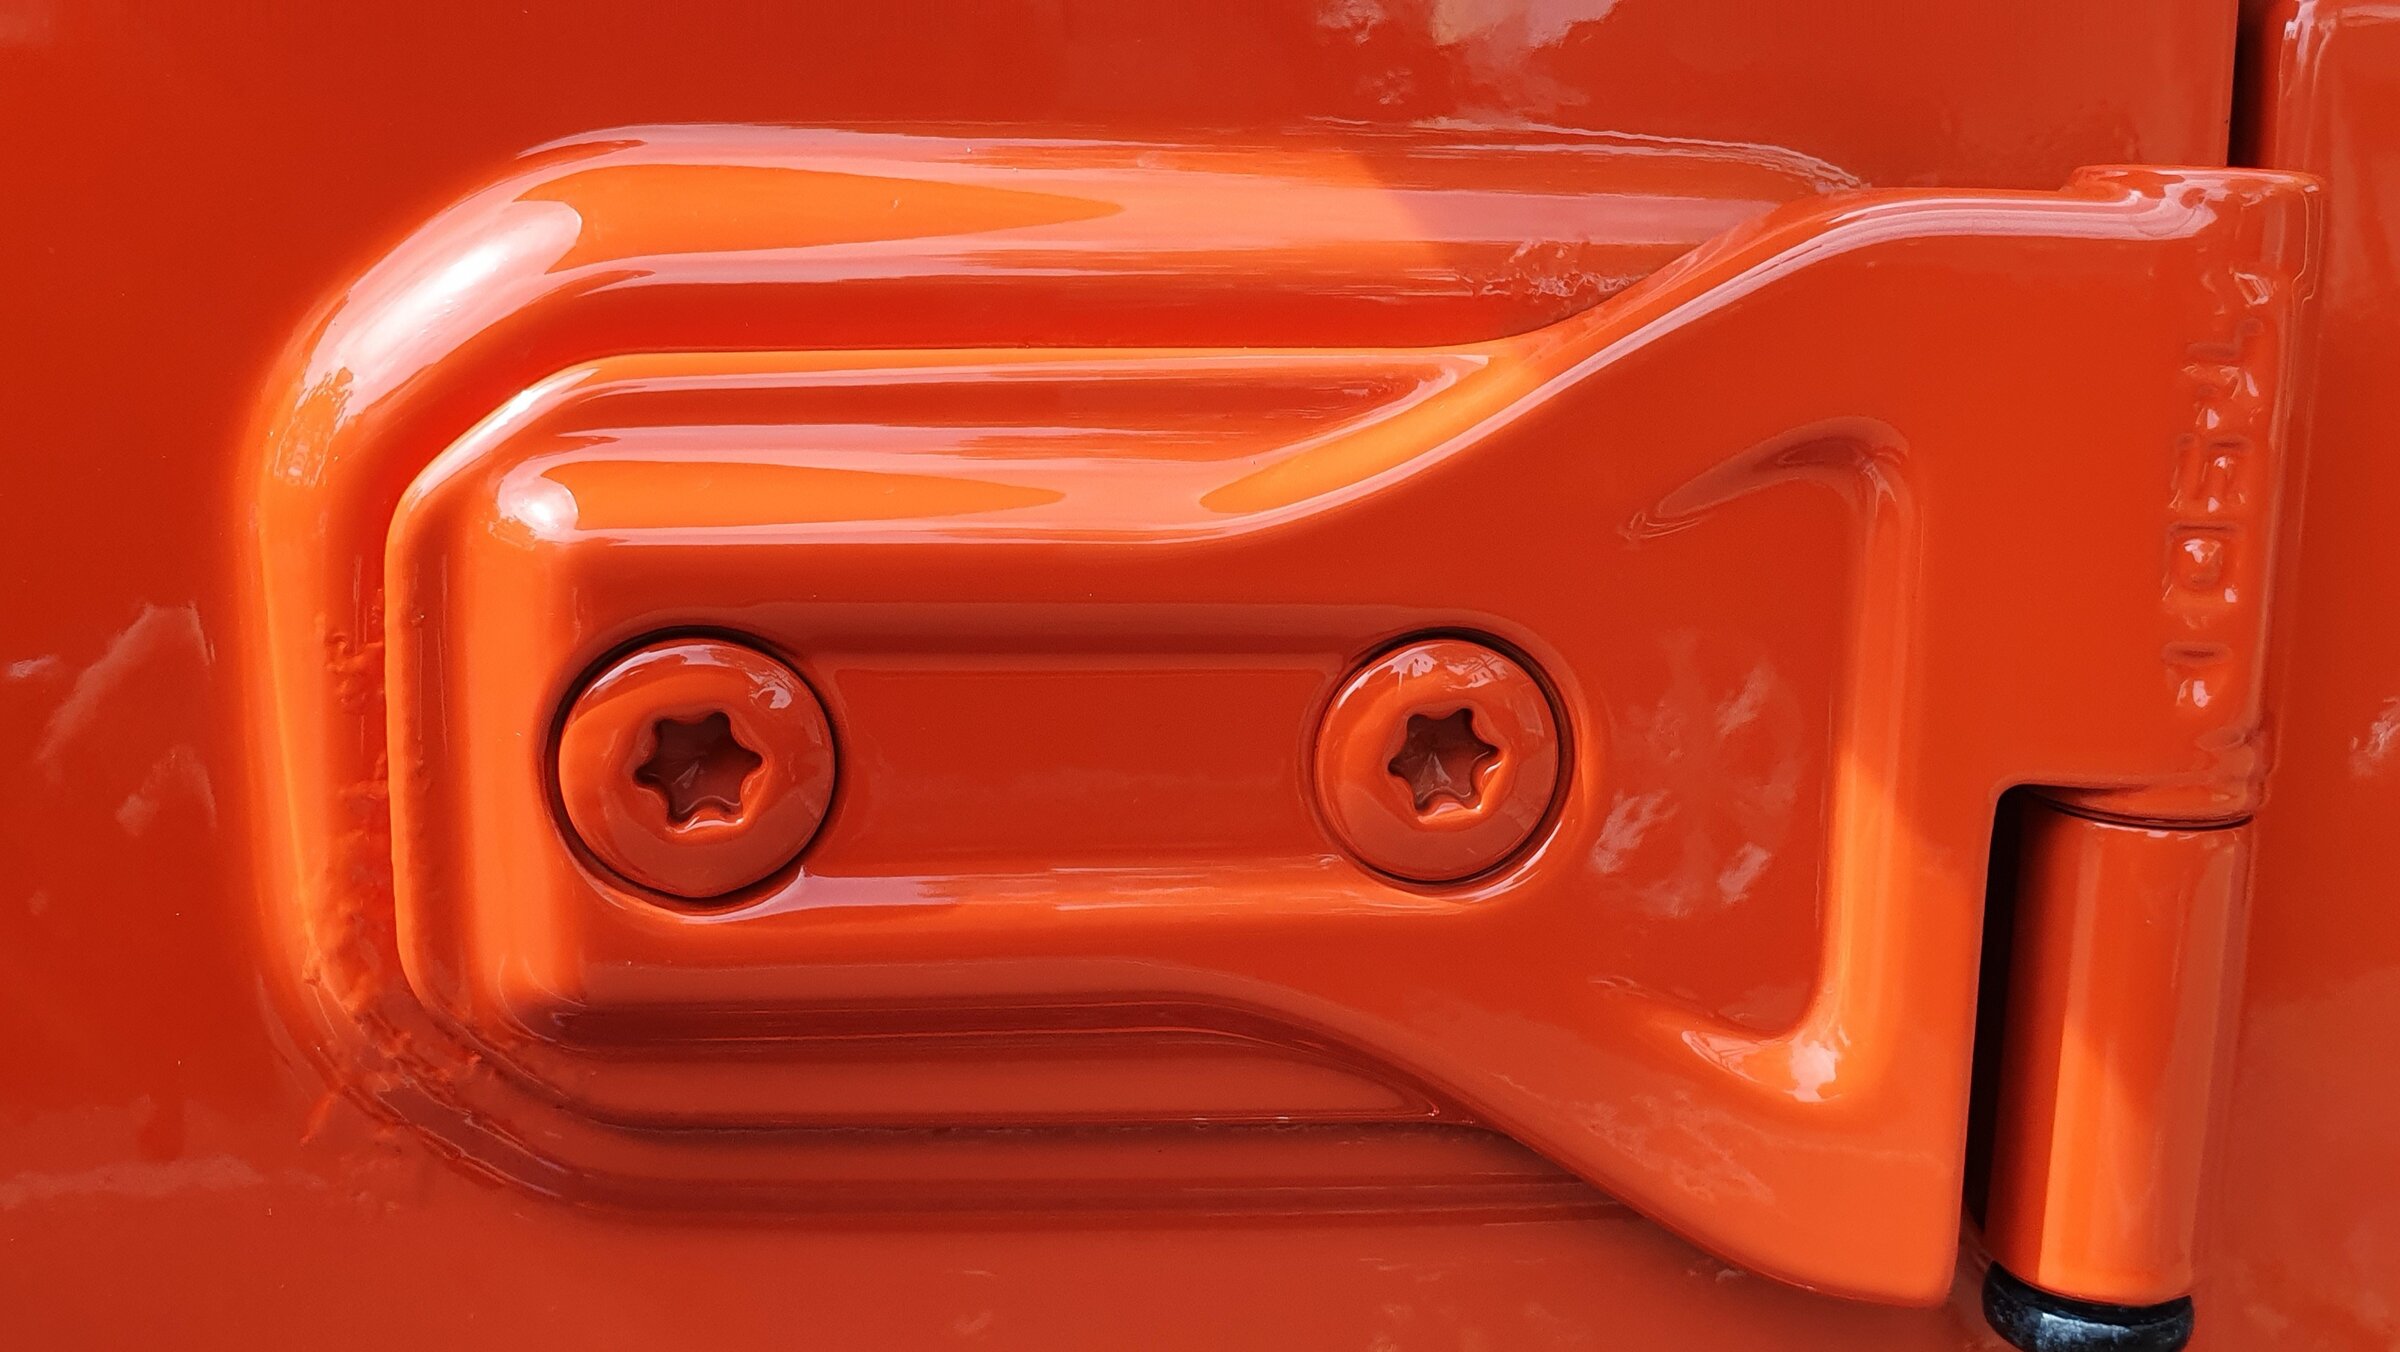 Paint bubbling around the door hinges - well documented in the US but has  anyone experienced this in Australia? | Jeep Wrangler Forums (JL / JLU) -  Rubicon, Sahara, Sport, 4xe, 392 